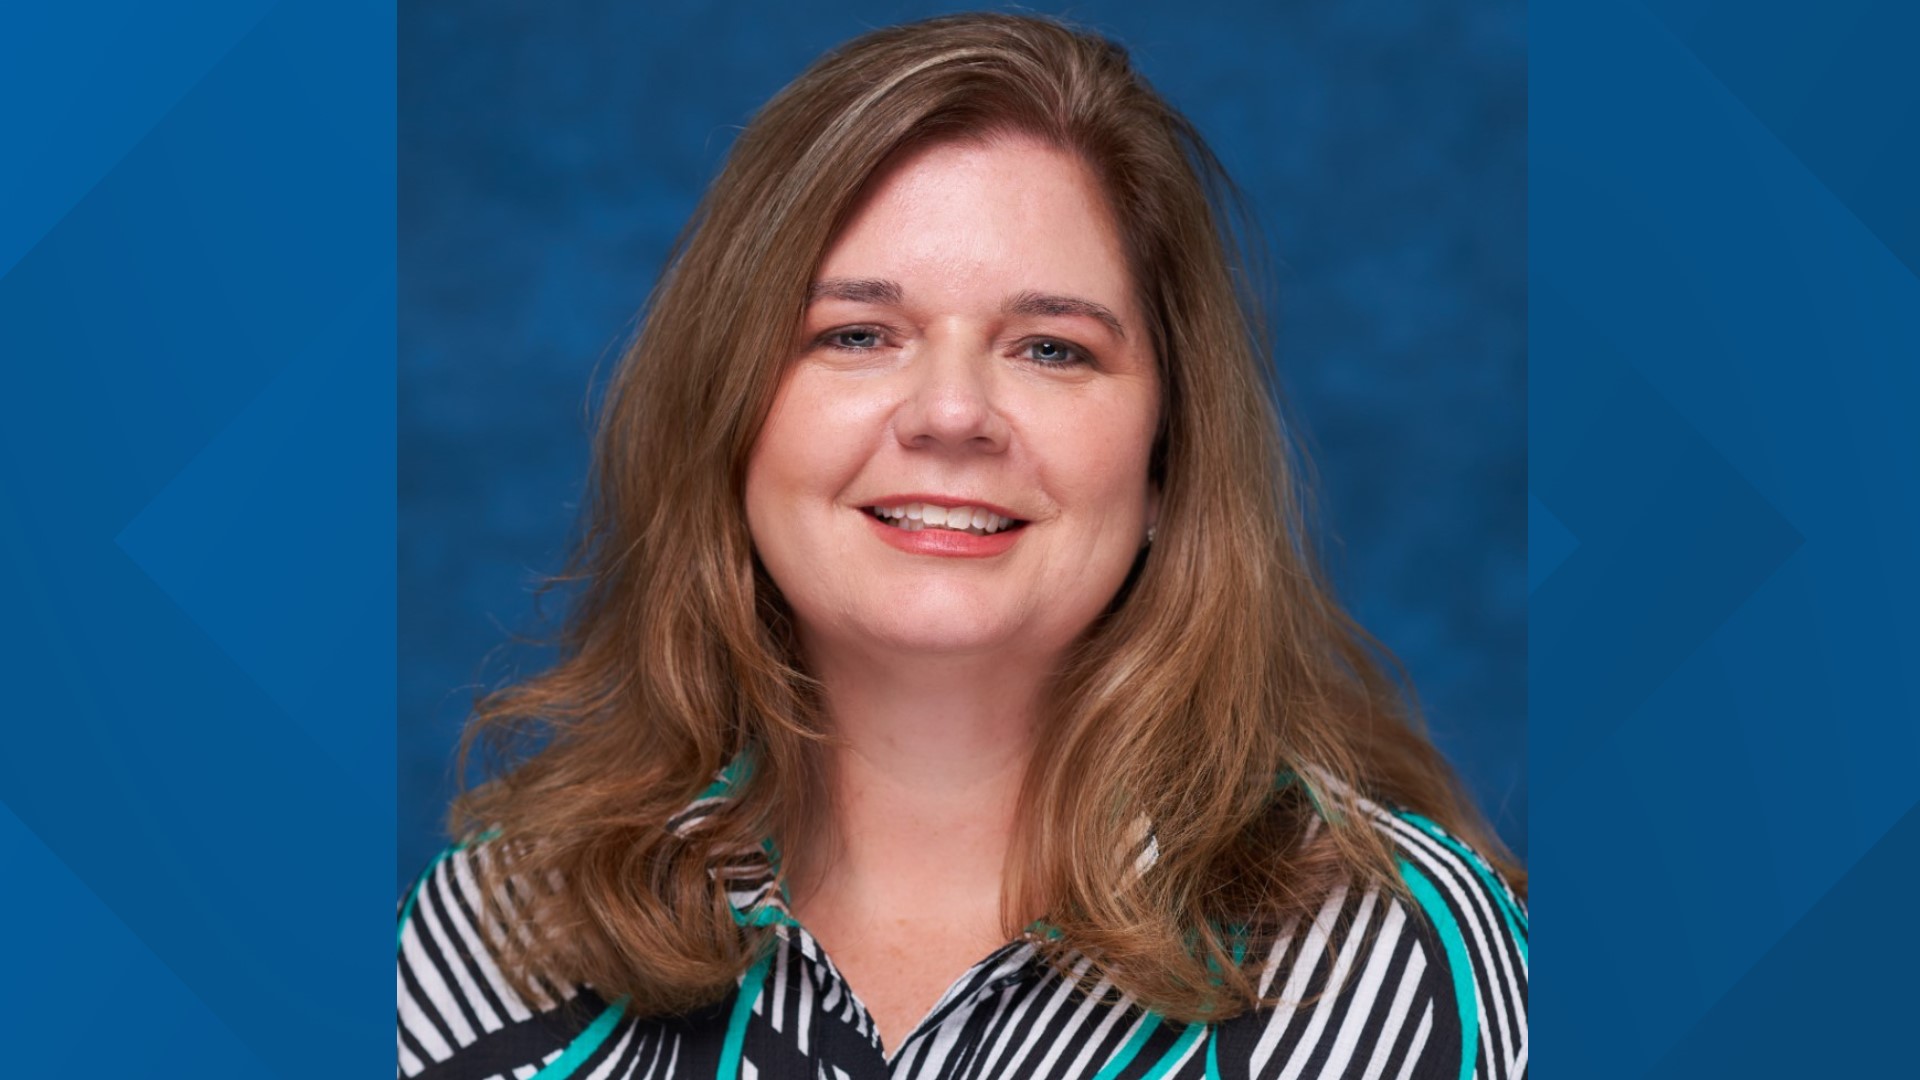 MISD has named Kellie Spencer as acting superintendent. Using a search firm, the Board will now start the preliminary search for a permanent superintendent.